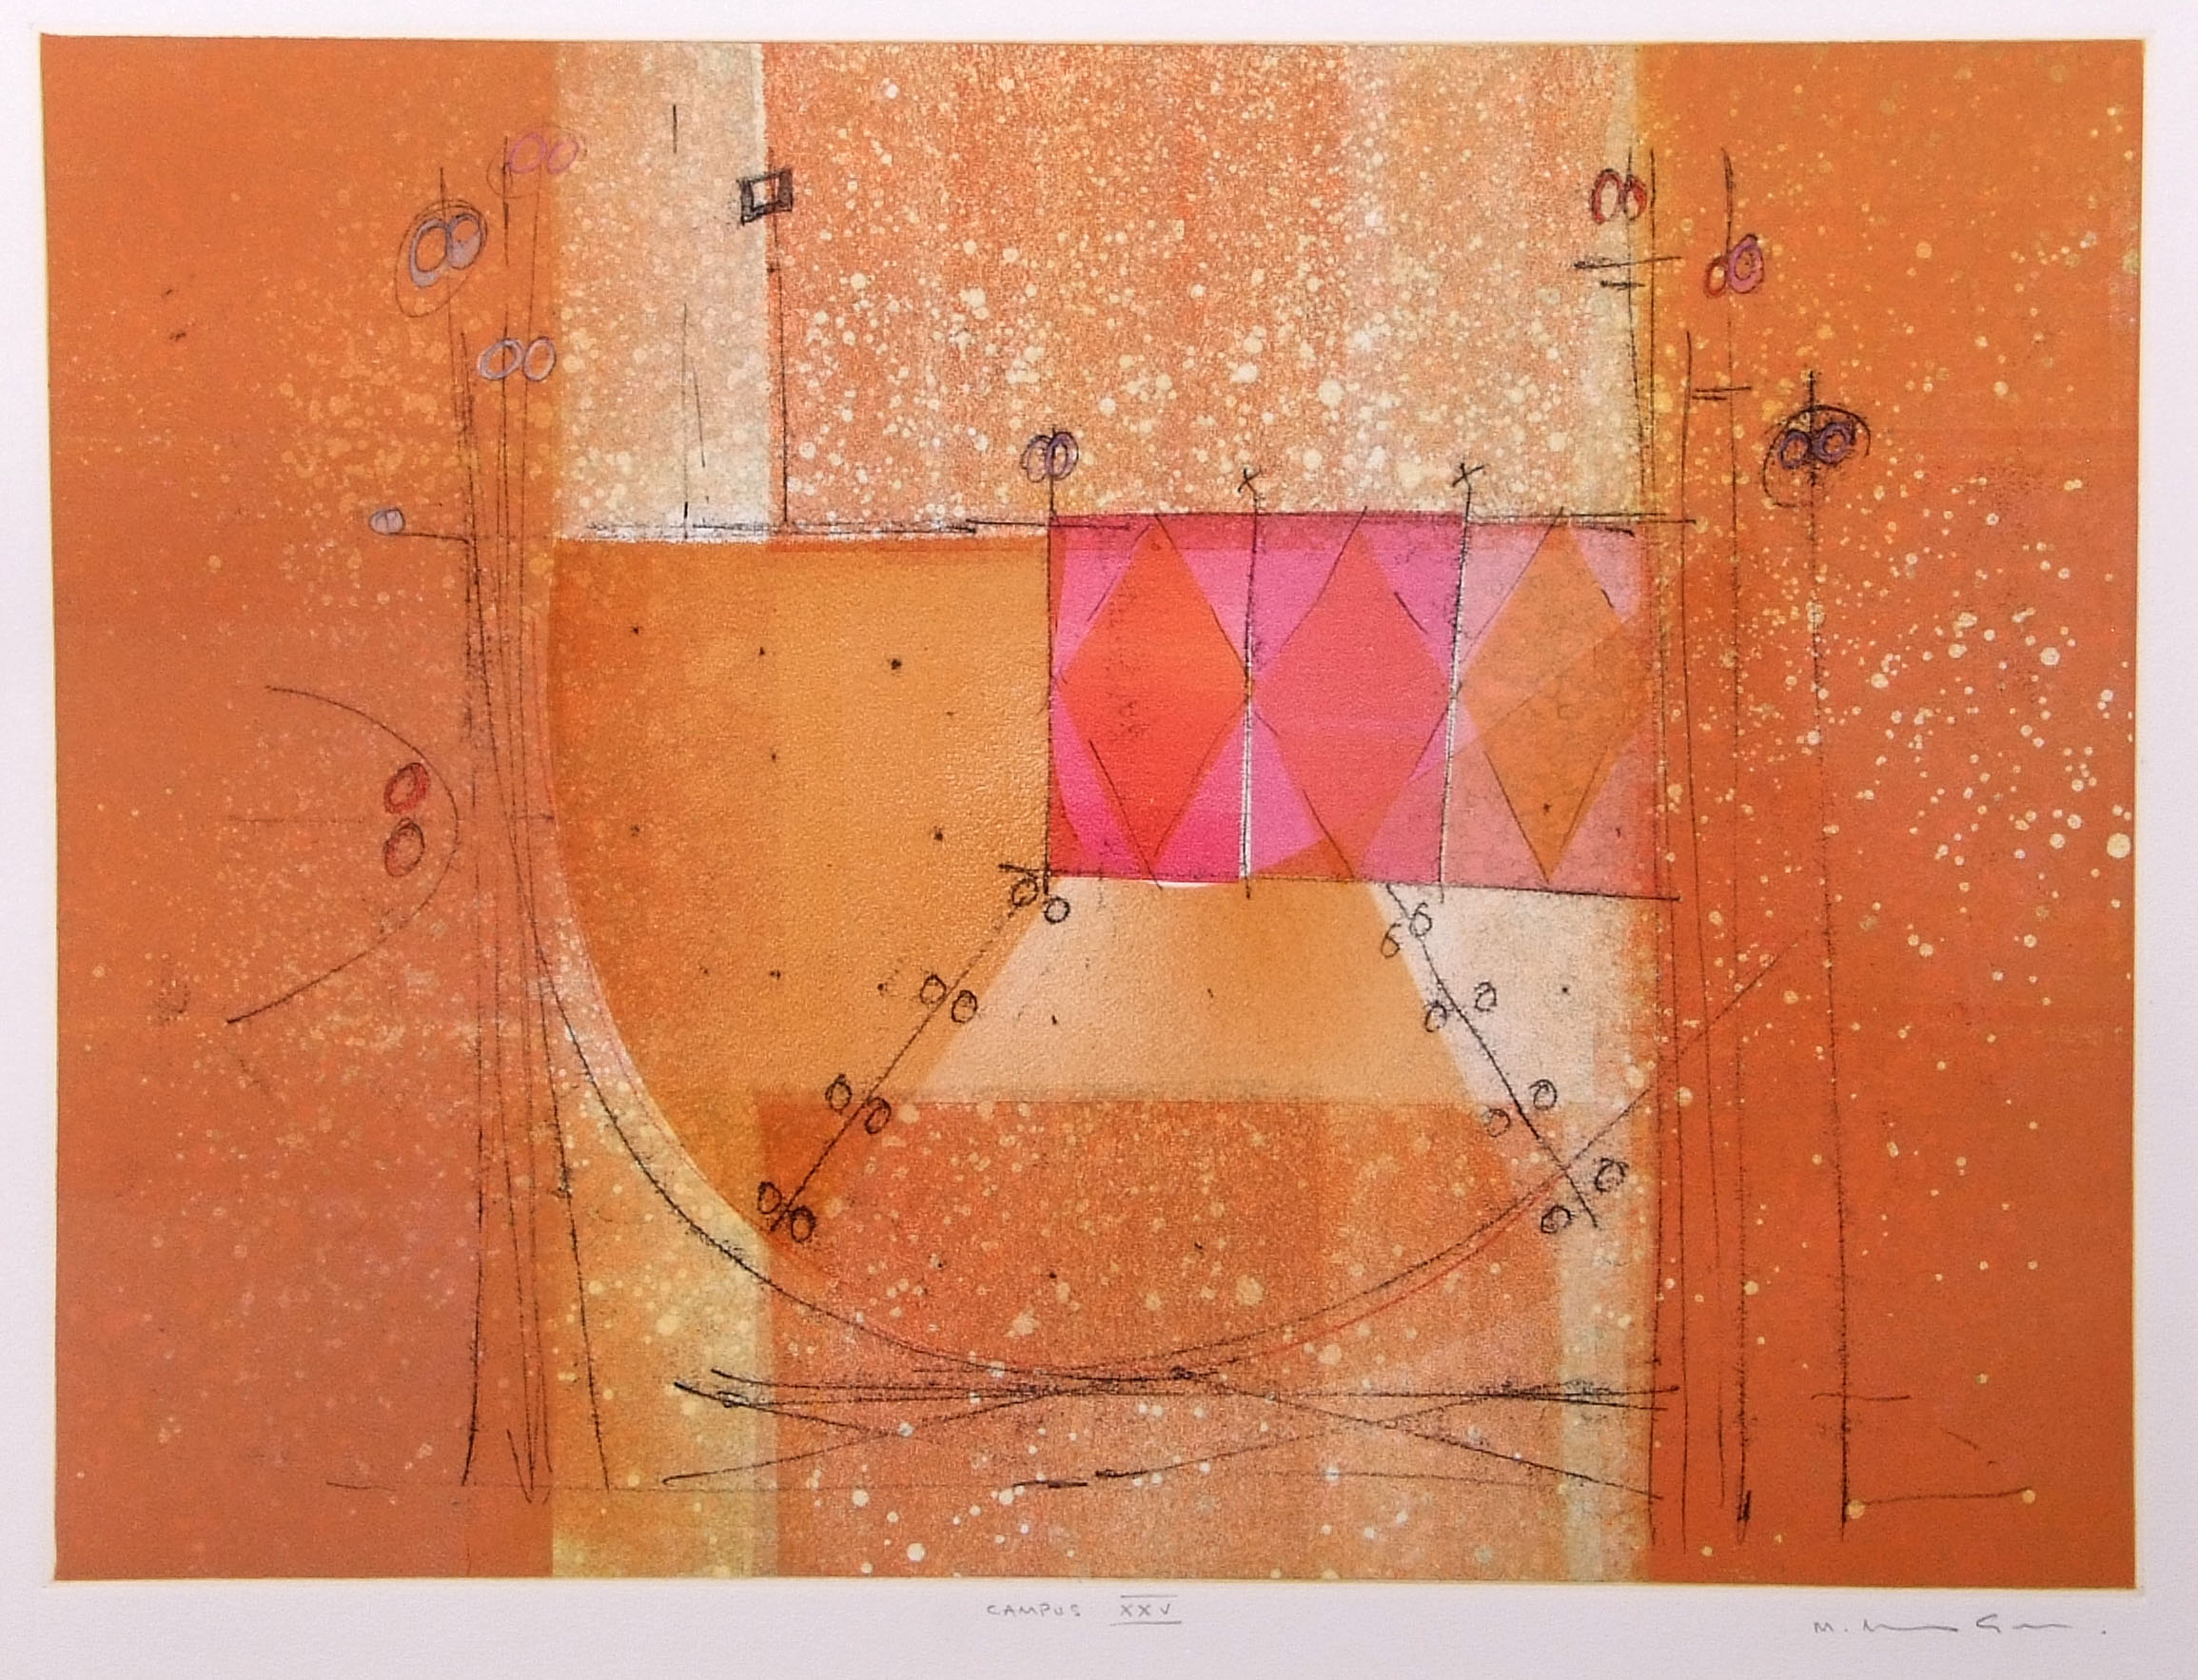 AR Mark Andrew Godwin (born 1957) "Campus XXV" coloured etching, signed and inscribed with title in - Image 2 of 2